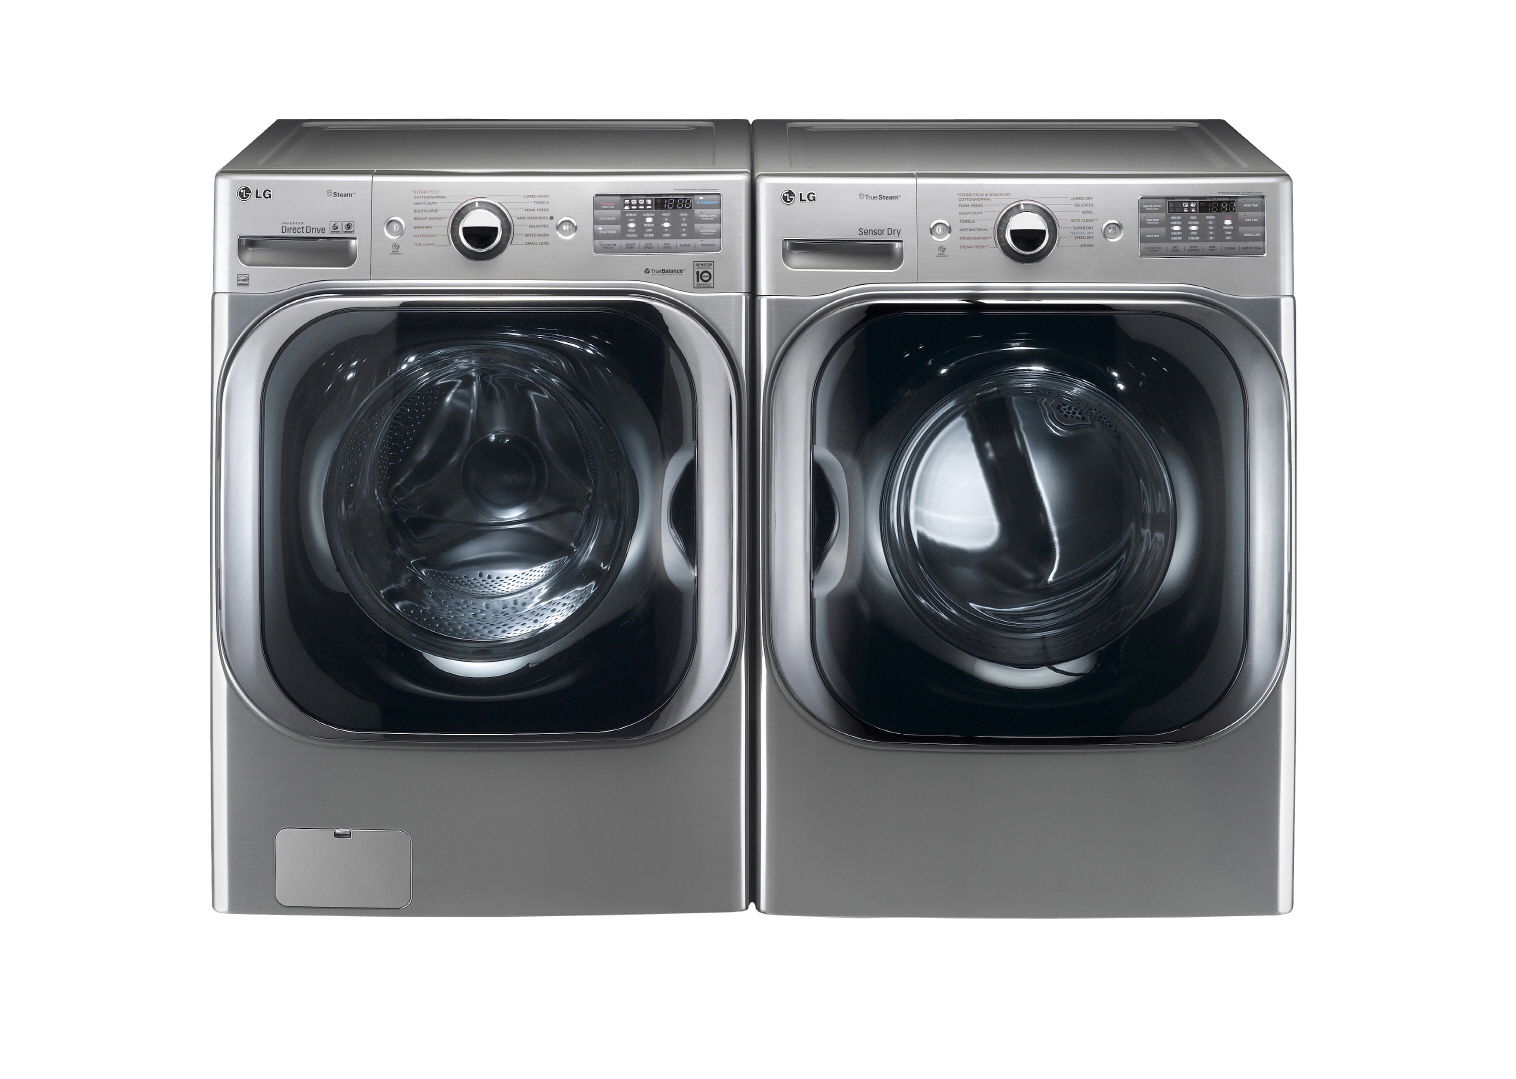 two washers are shown with the door open